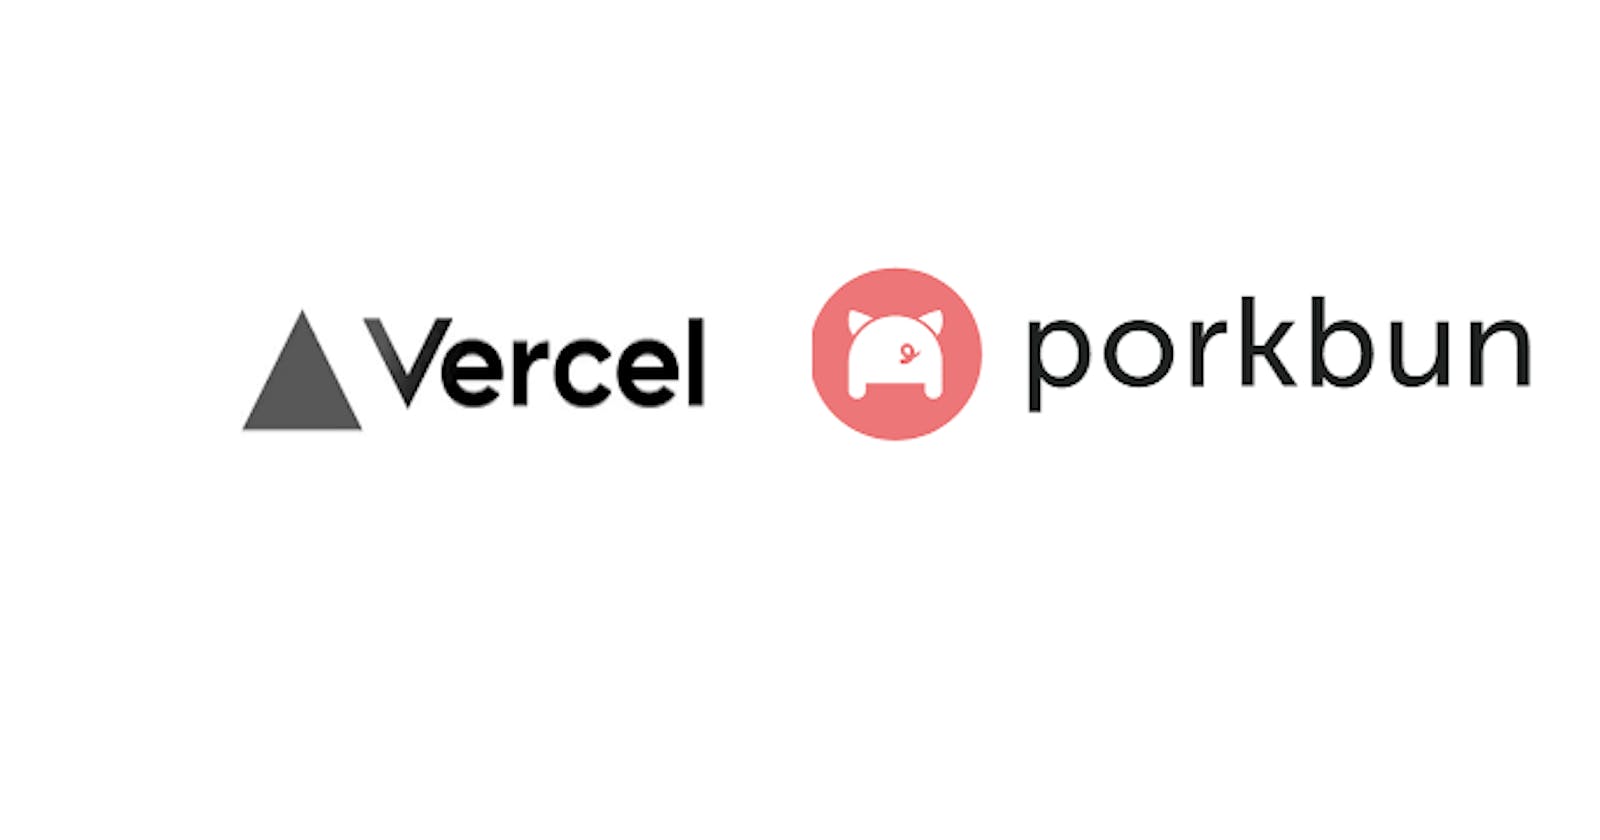 Buying A Domain Name From Porkbun And Using It For Your Vercel Project